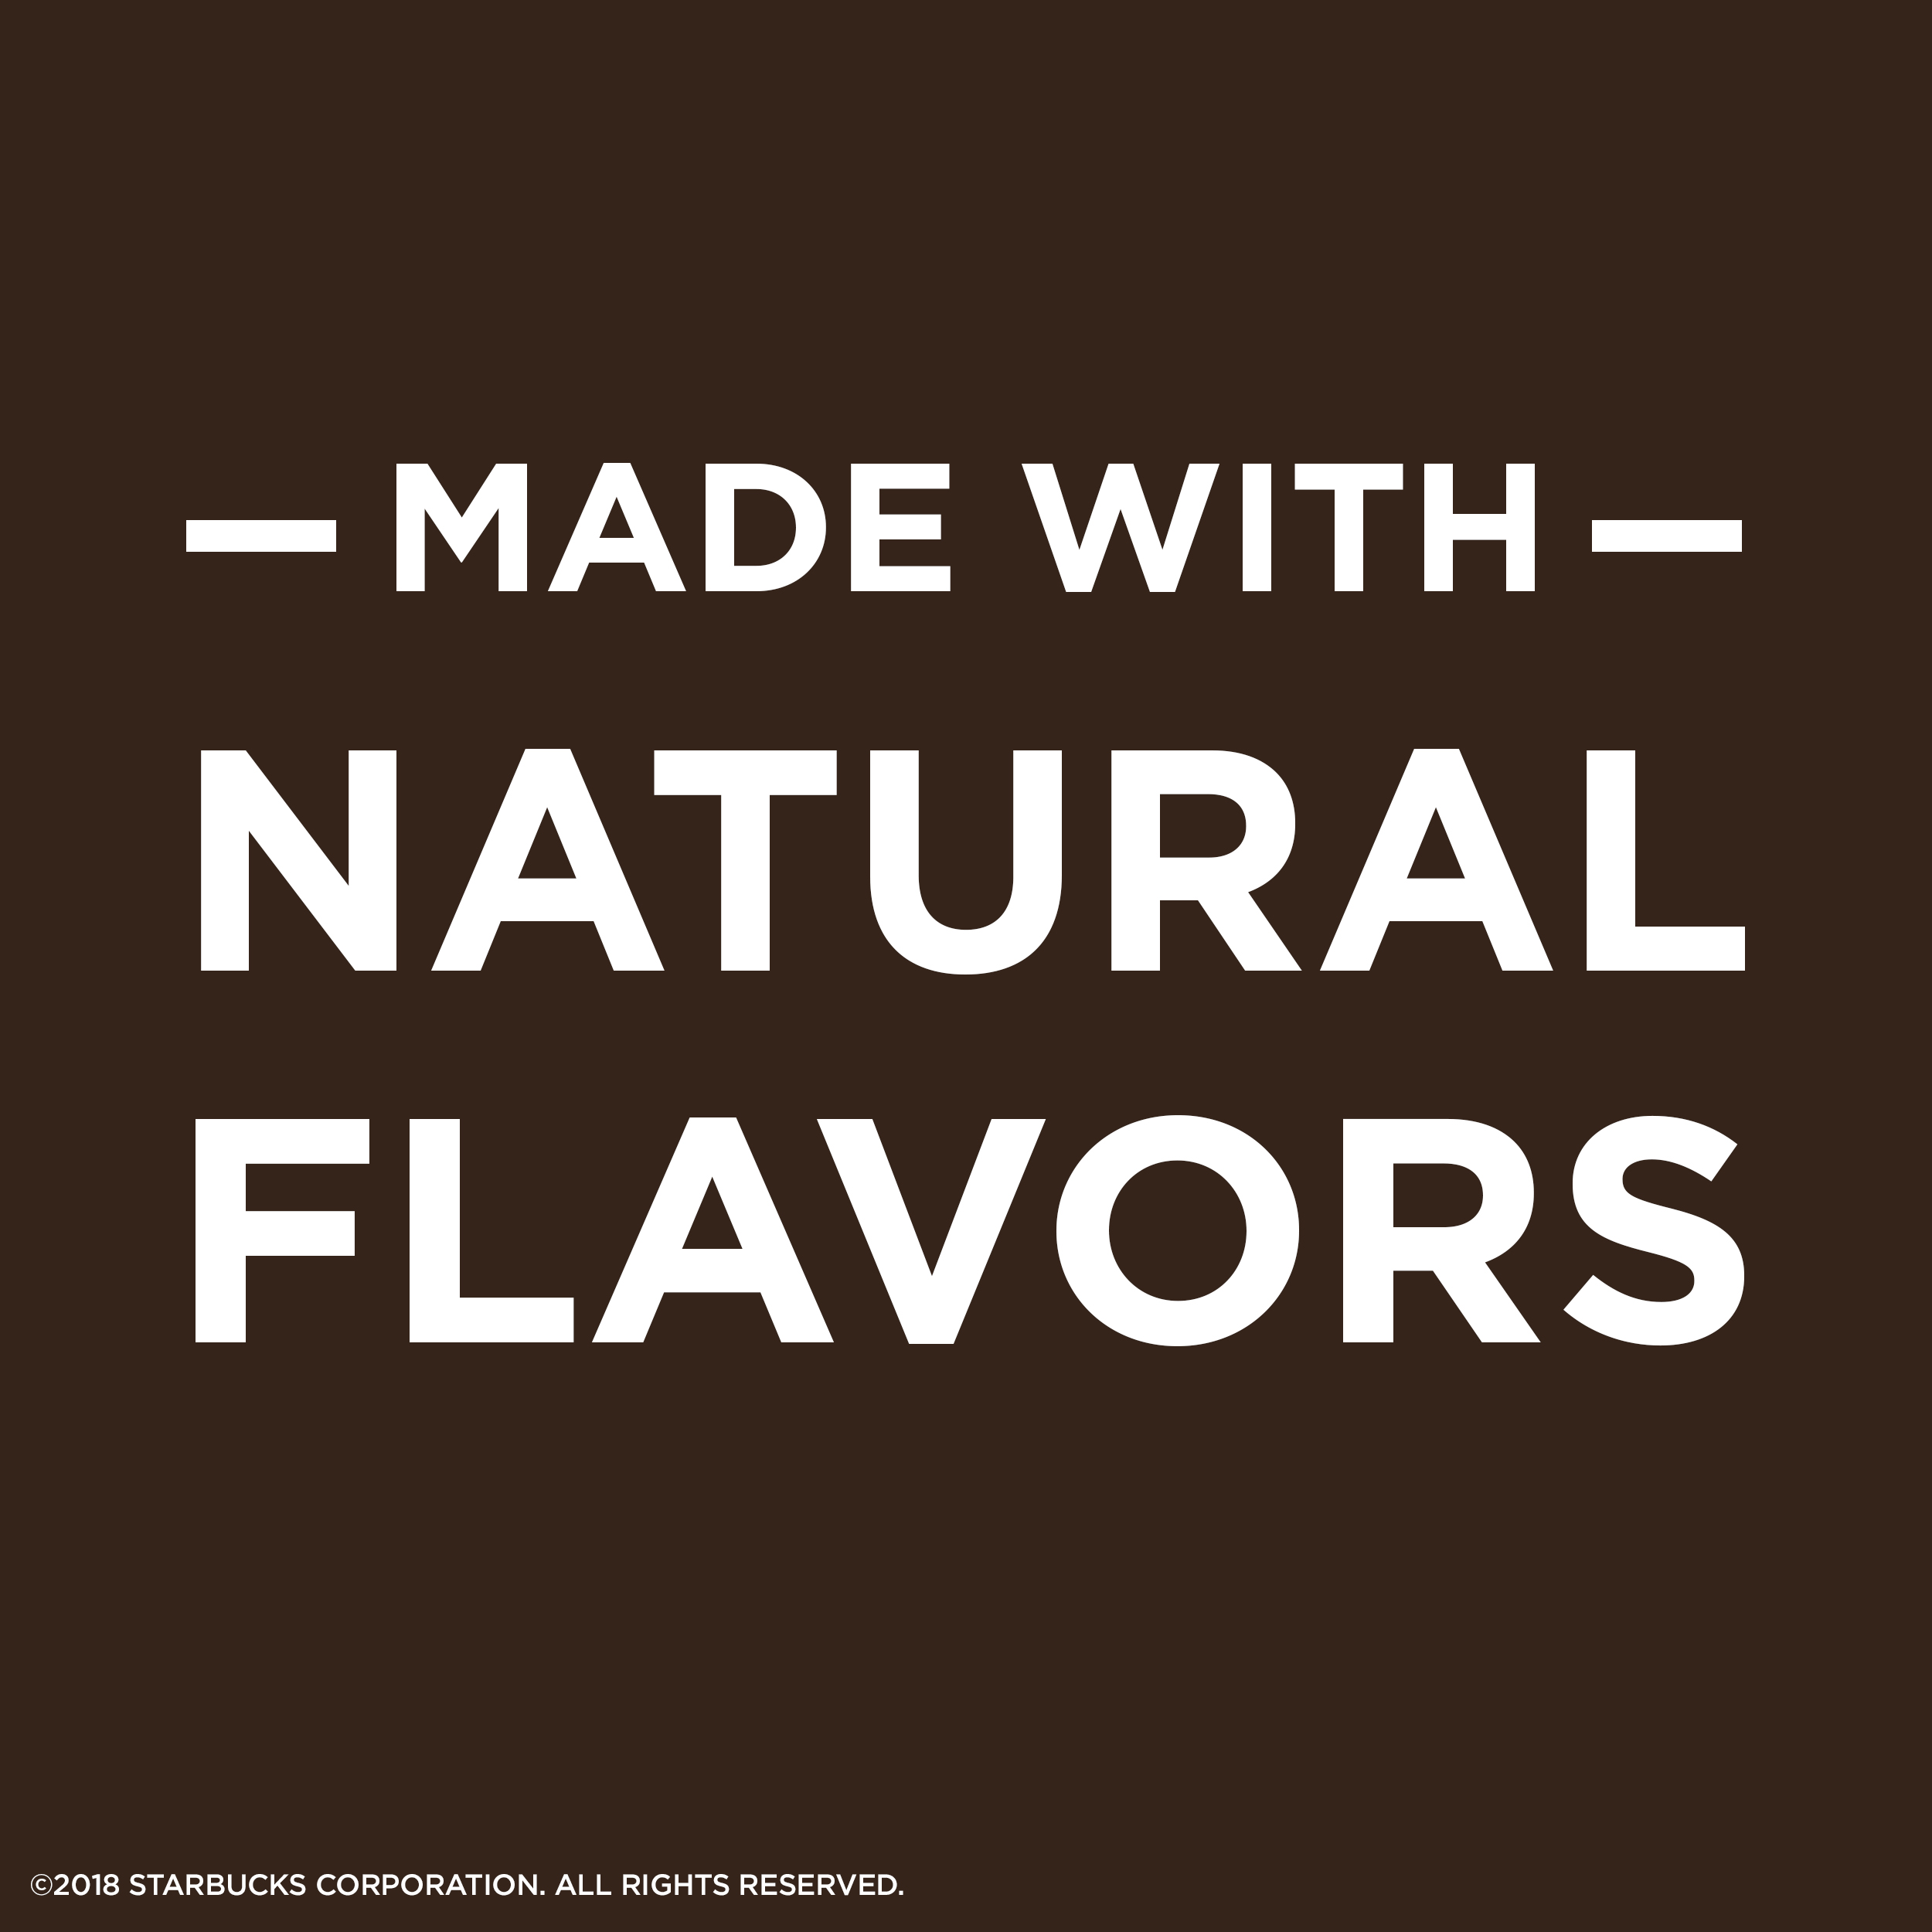 Starbucks Naturally Flavored Caramel Coffee Syrup, 12.7 fl oz - image 5 of 8